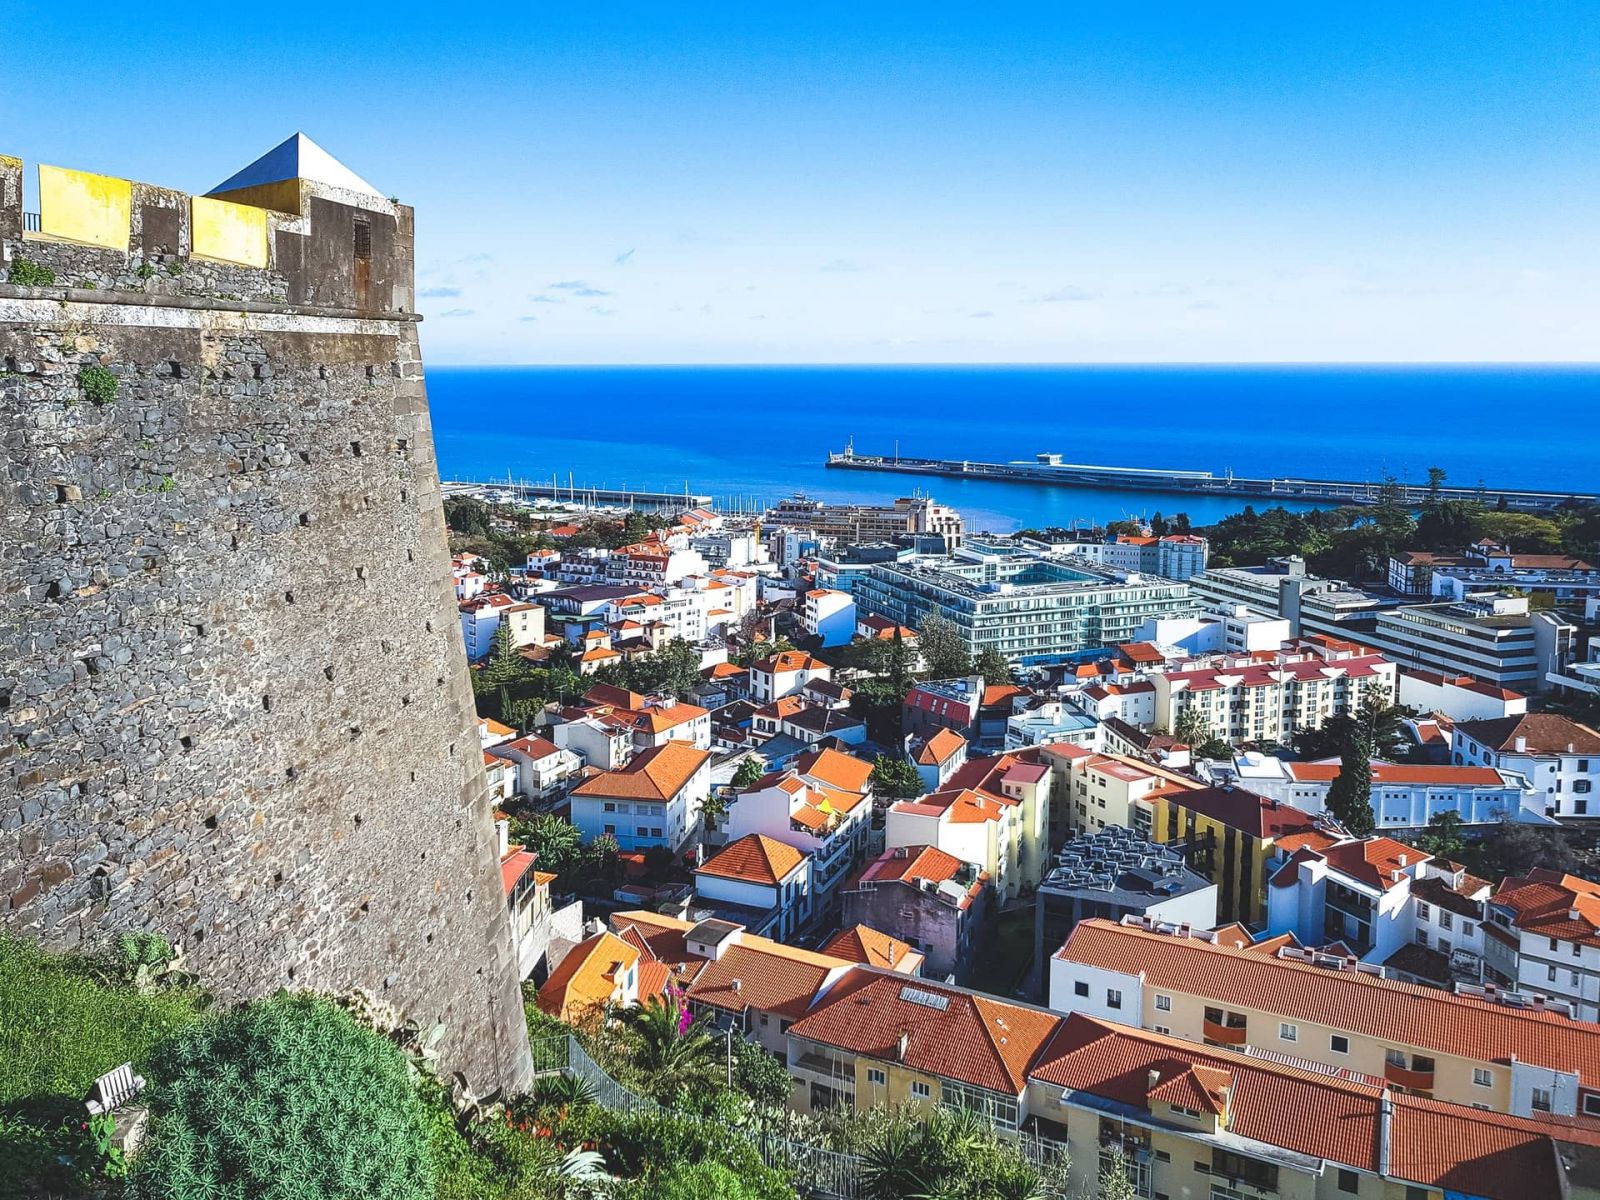 Funchal Madeira | Lookout view of the city considered the 5th best place to property invest. 